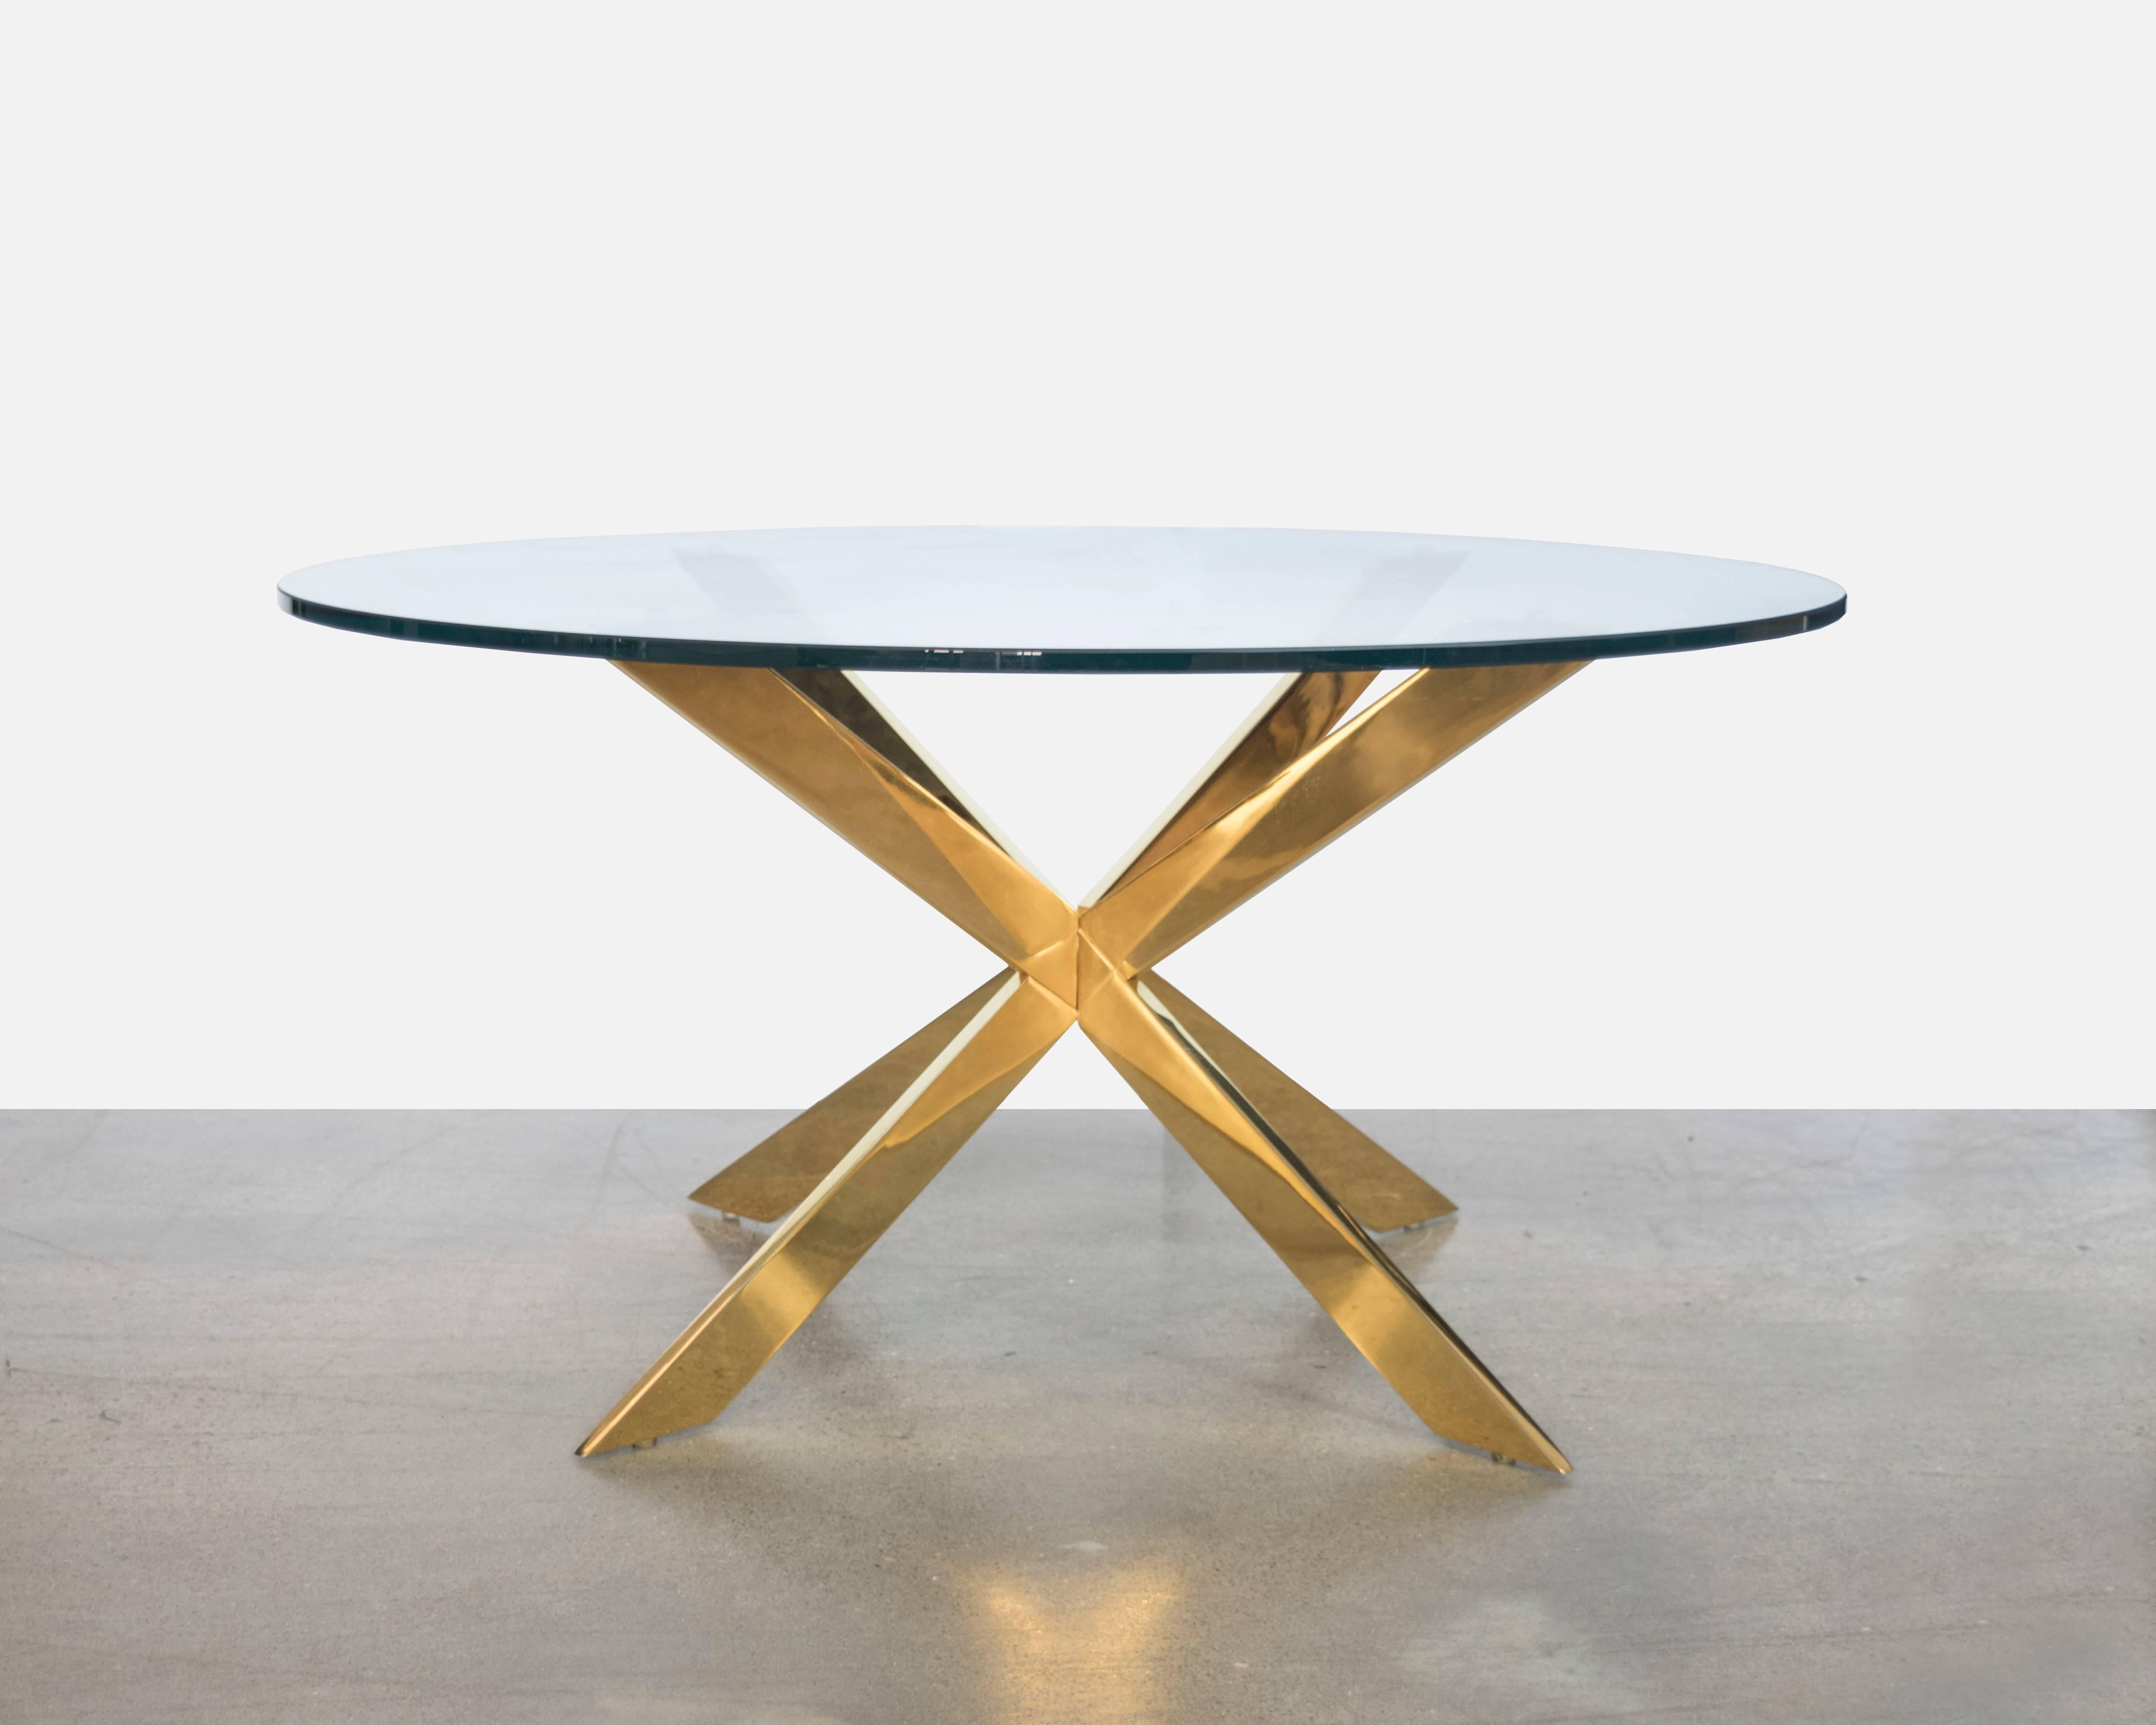 Exquisite double x-base brass coffee table designed by Leon Rosen for Pace Collection in the 1970s.